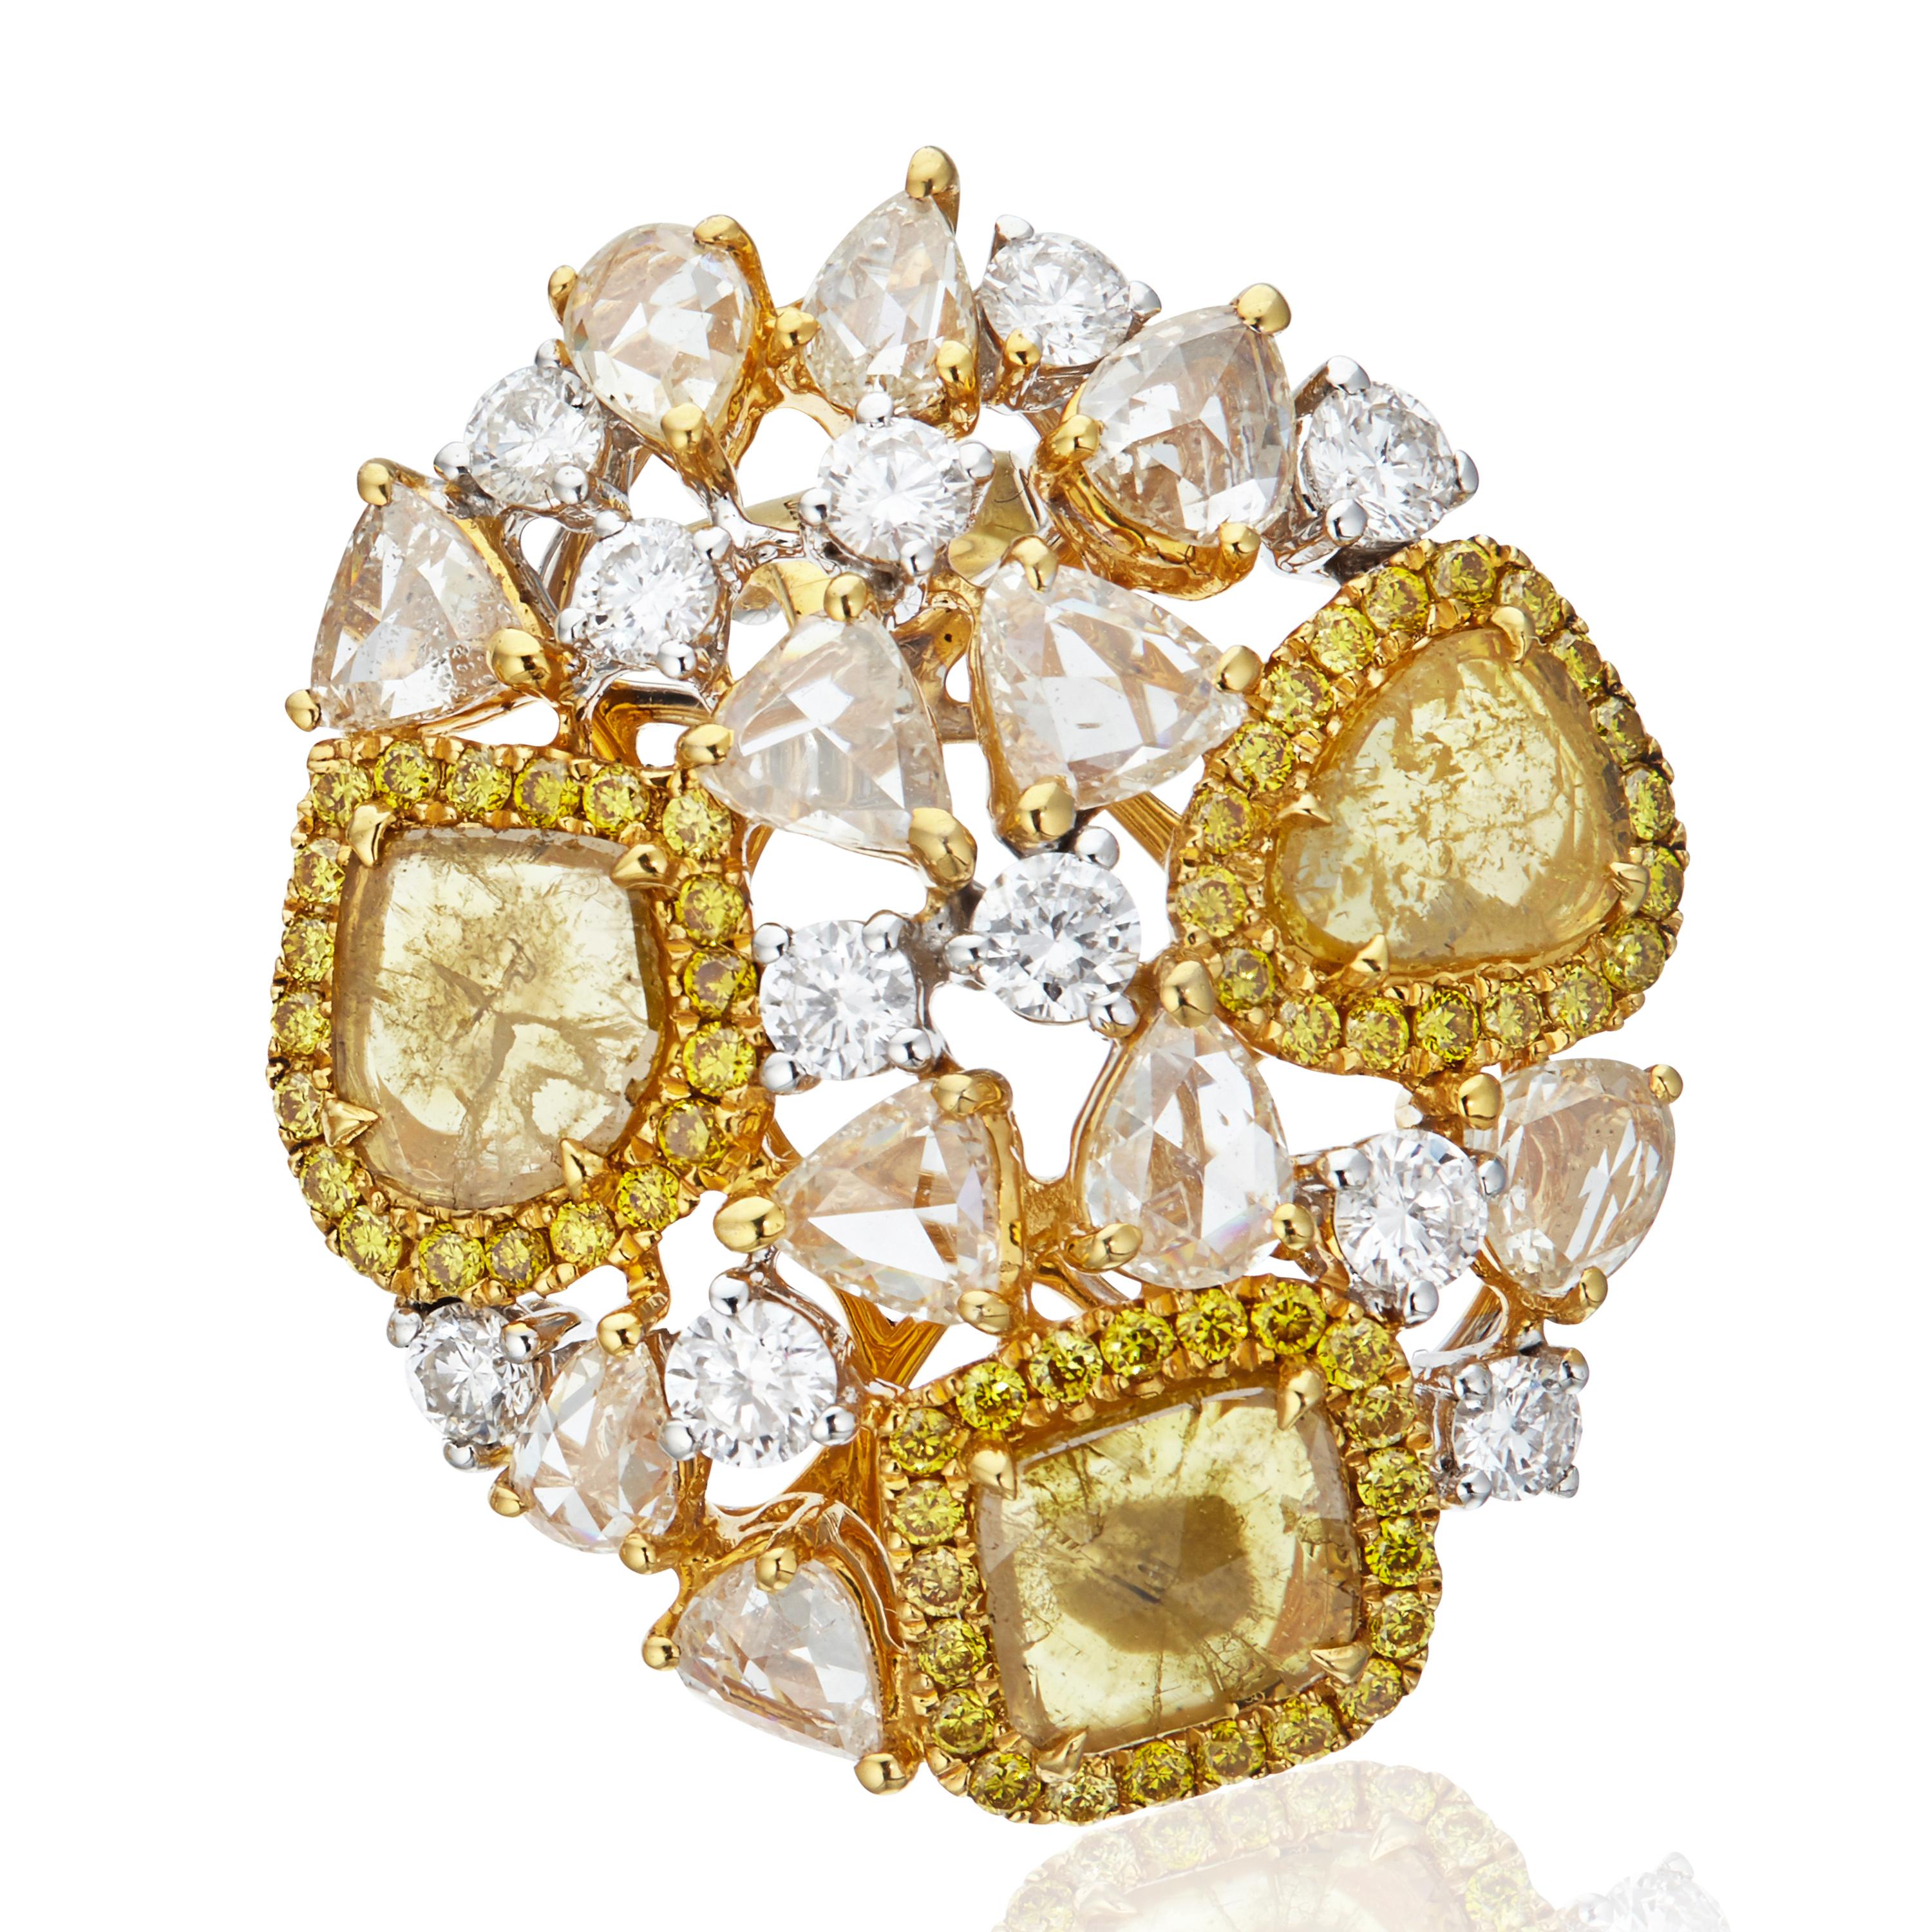 Gross weight: 12.840grams
Gold weight : 11.700 grams 
Diamond weight : 5.71 carats 
Coloured slice diamonds and rose cut diamonds in 18k gold.
Also available in white slice and rose cut diamonds in 18k white gold

Golden Cosmos Earrings by Manpriya